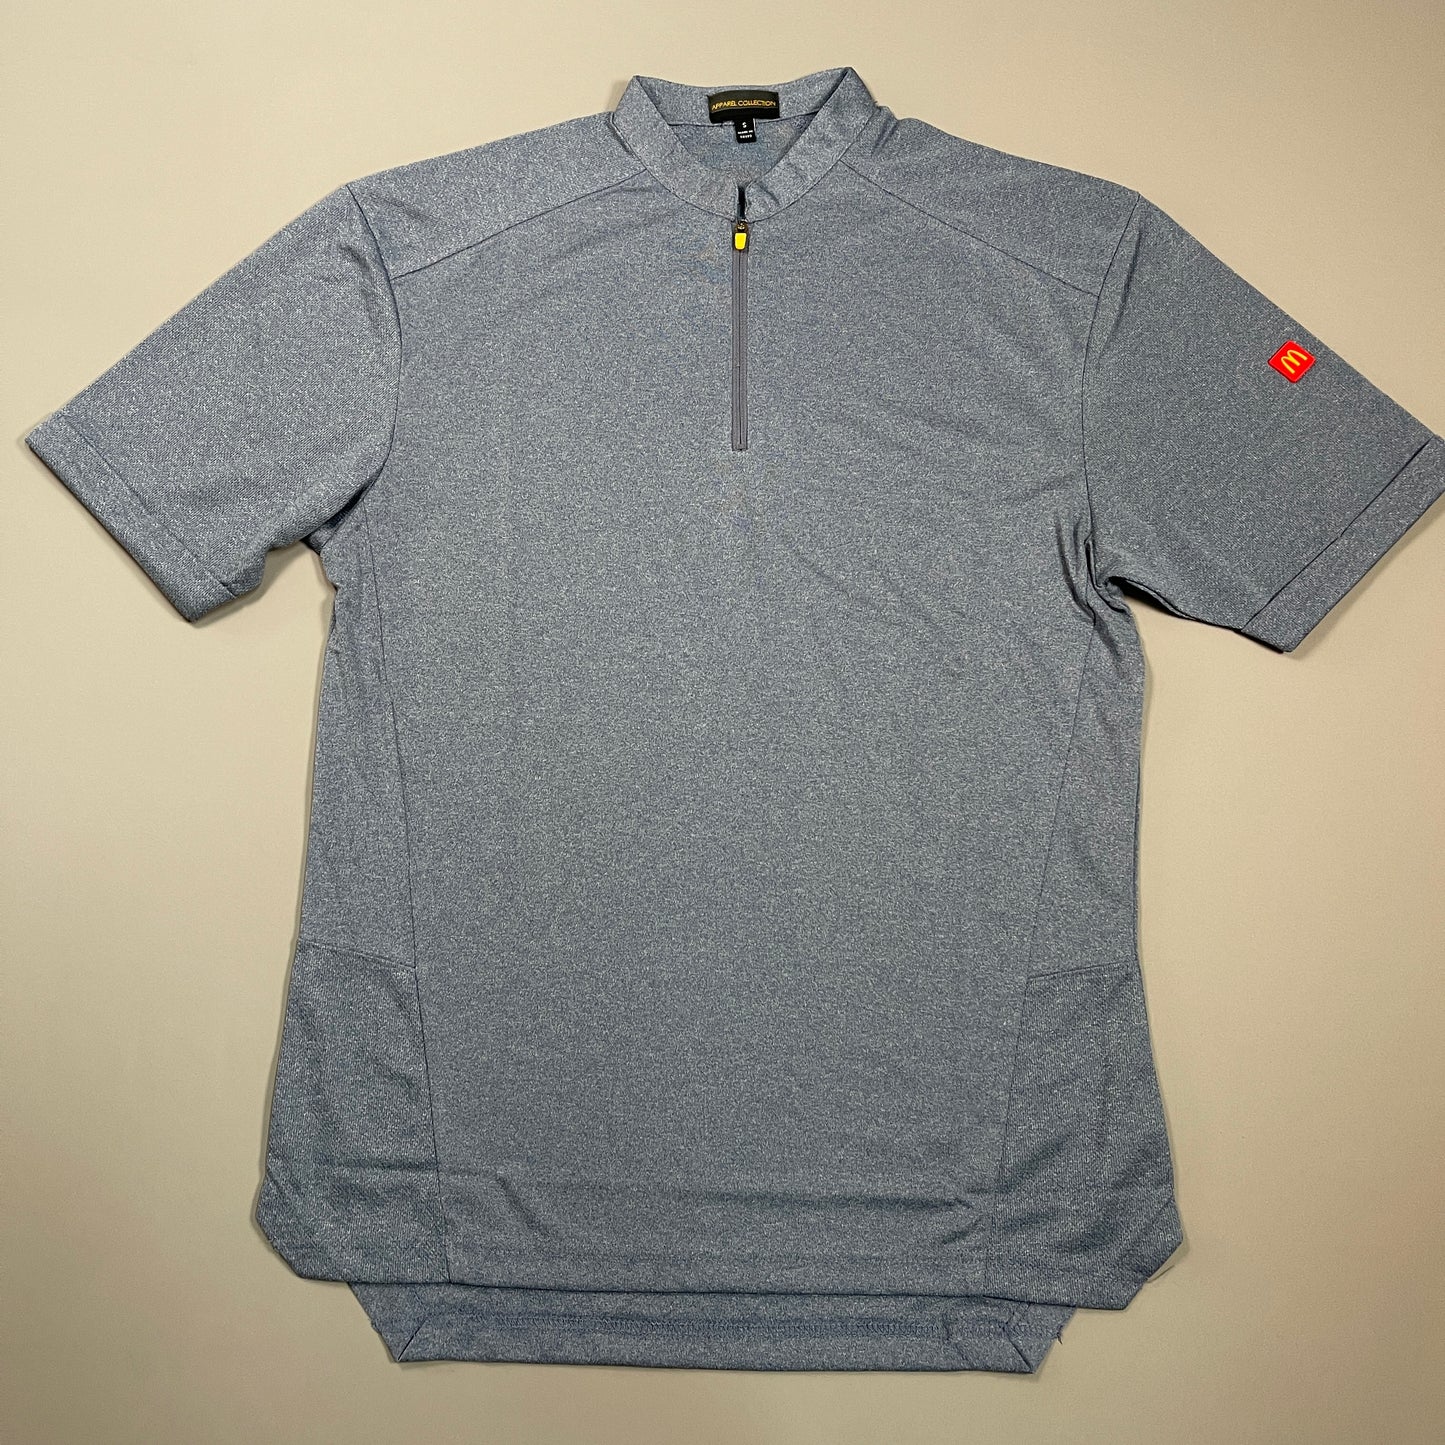 MCDONALD'S by APPAREL COLLECTION Crew Zip Polo Shirt Men's Sz S Heather Gray (New Other)